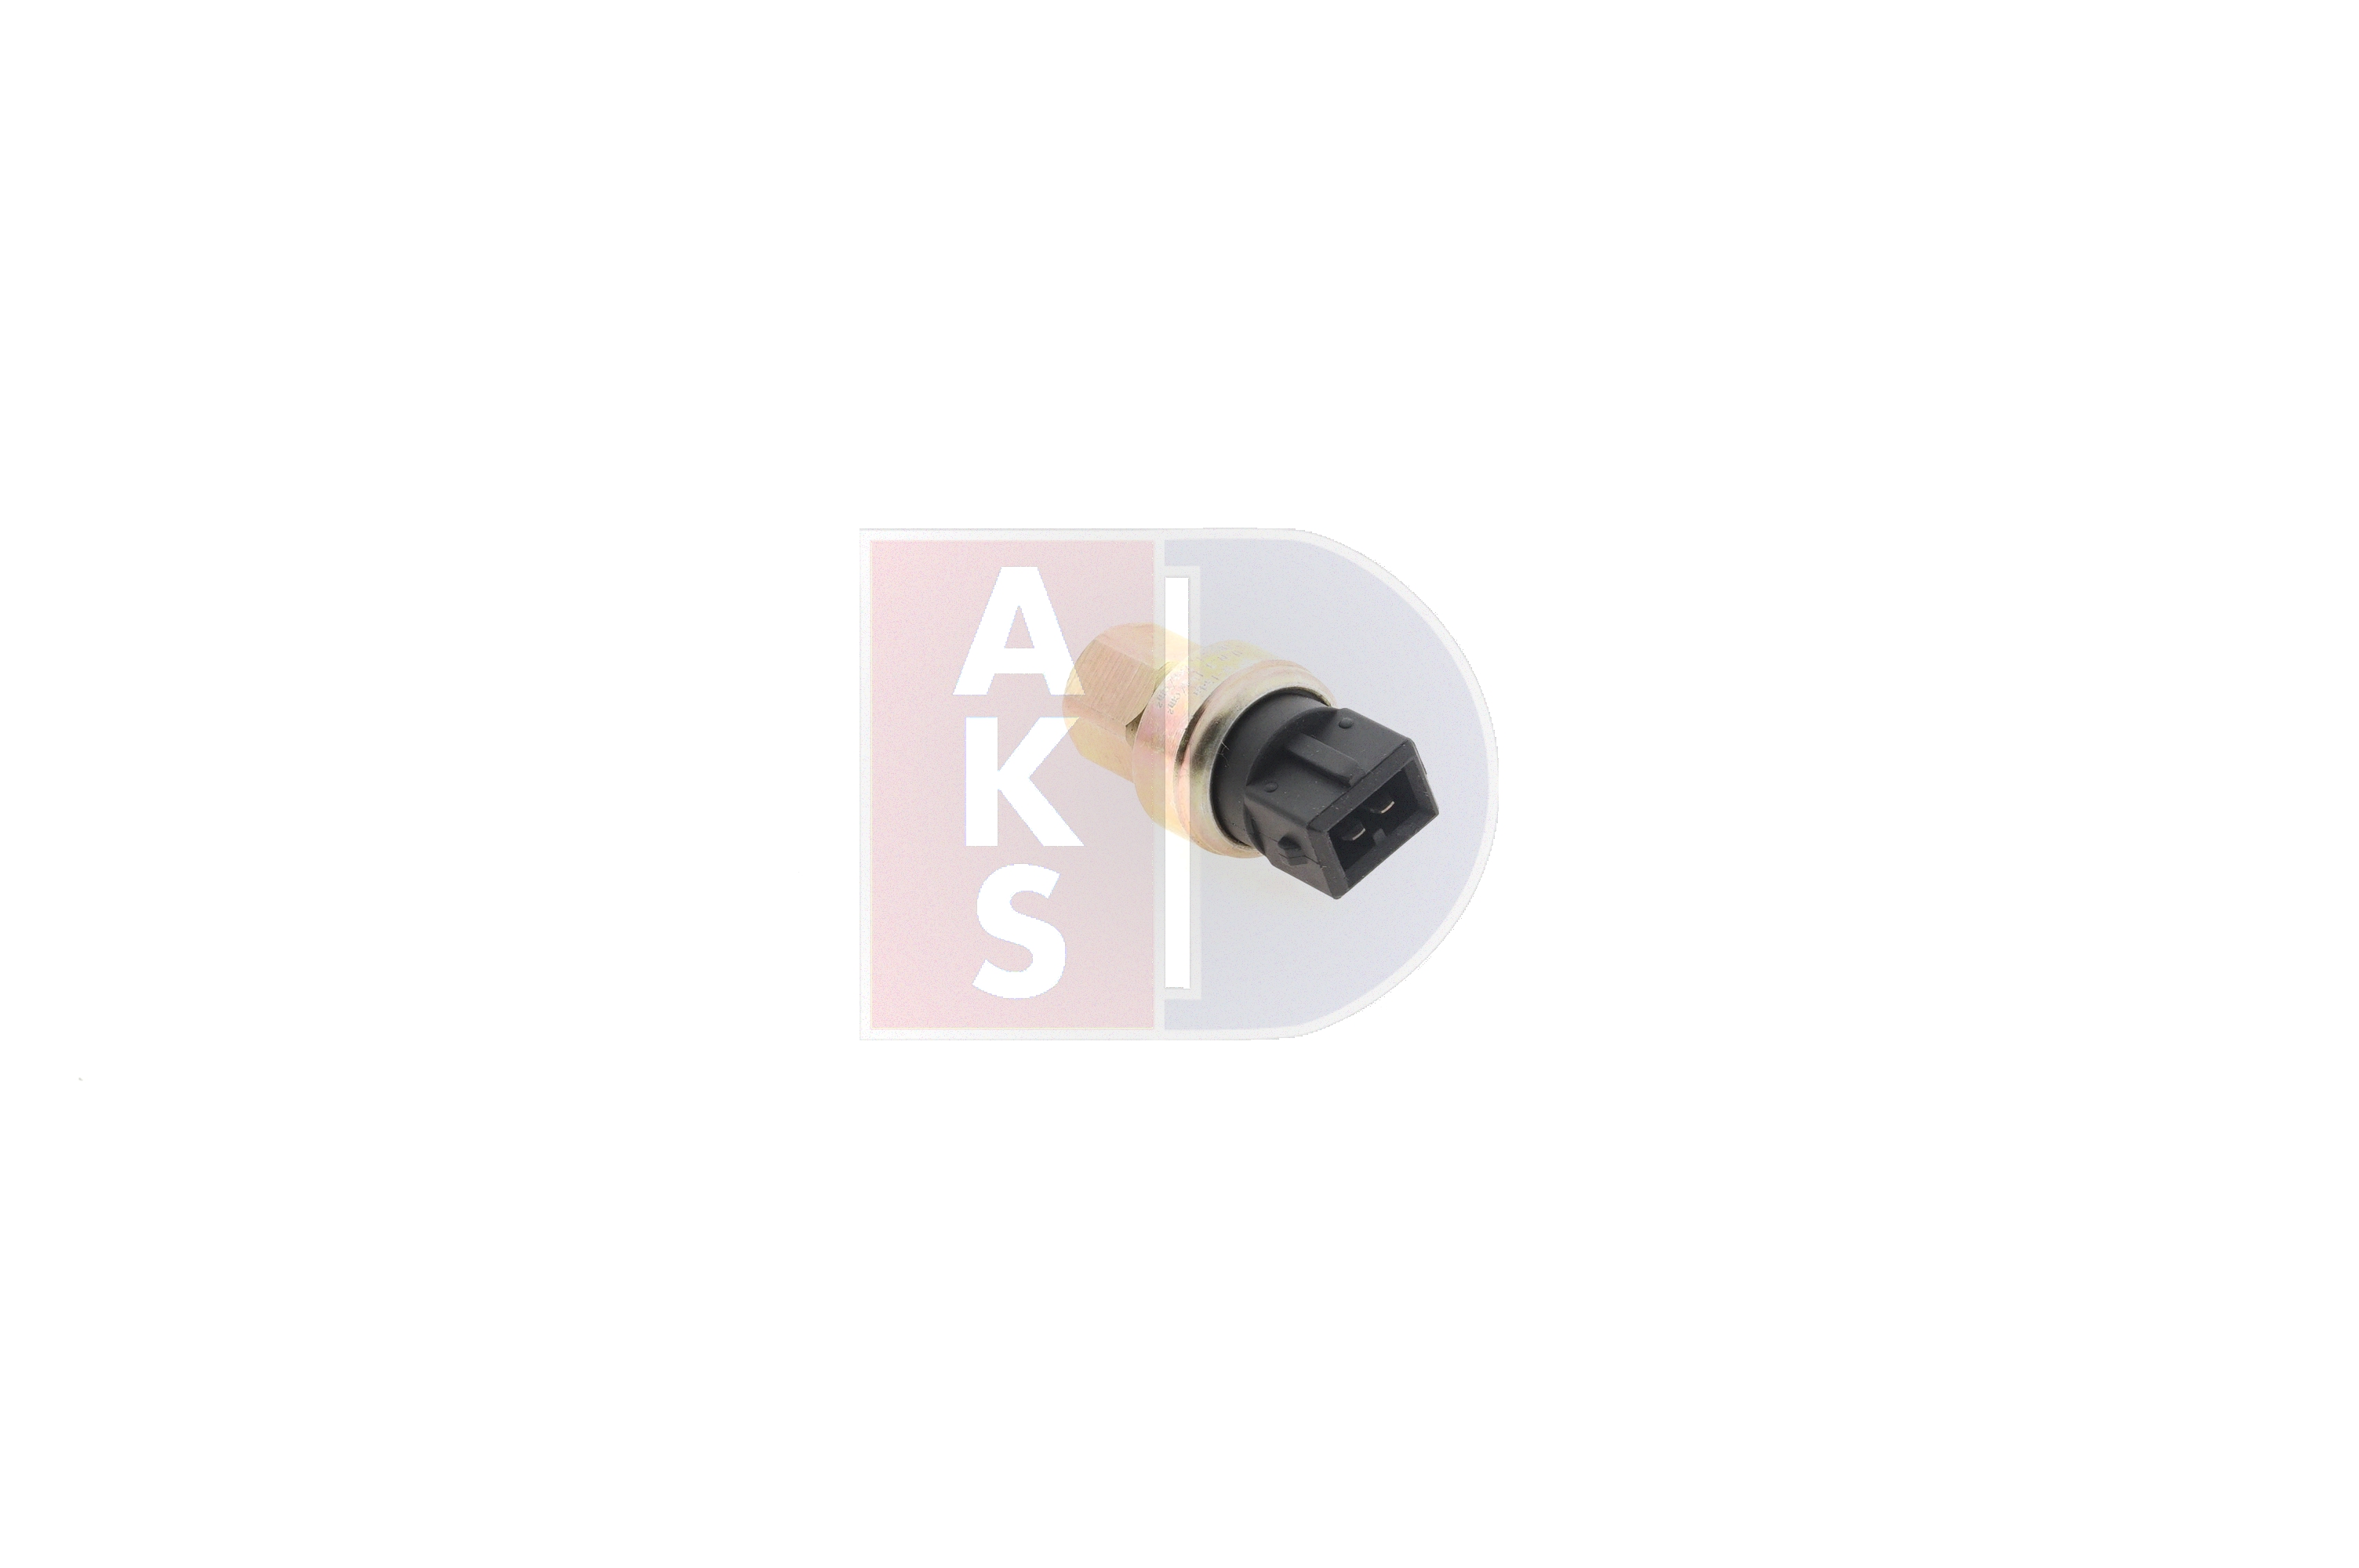 Volvo Air conditioning pressure switch AKS DASIS 750140N at a good price